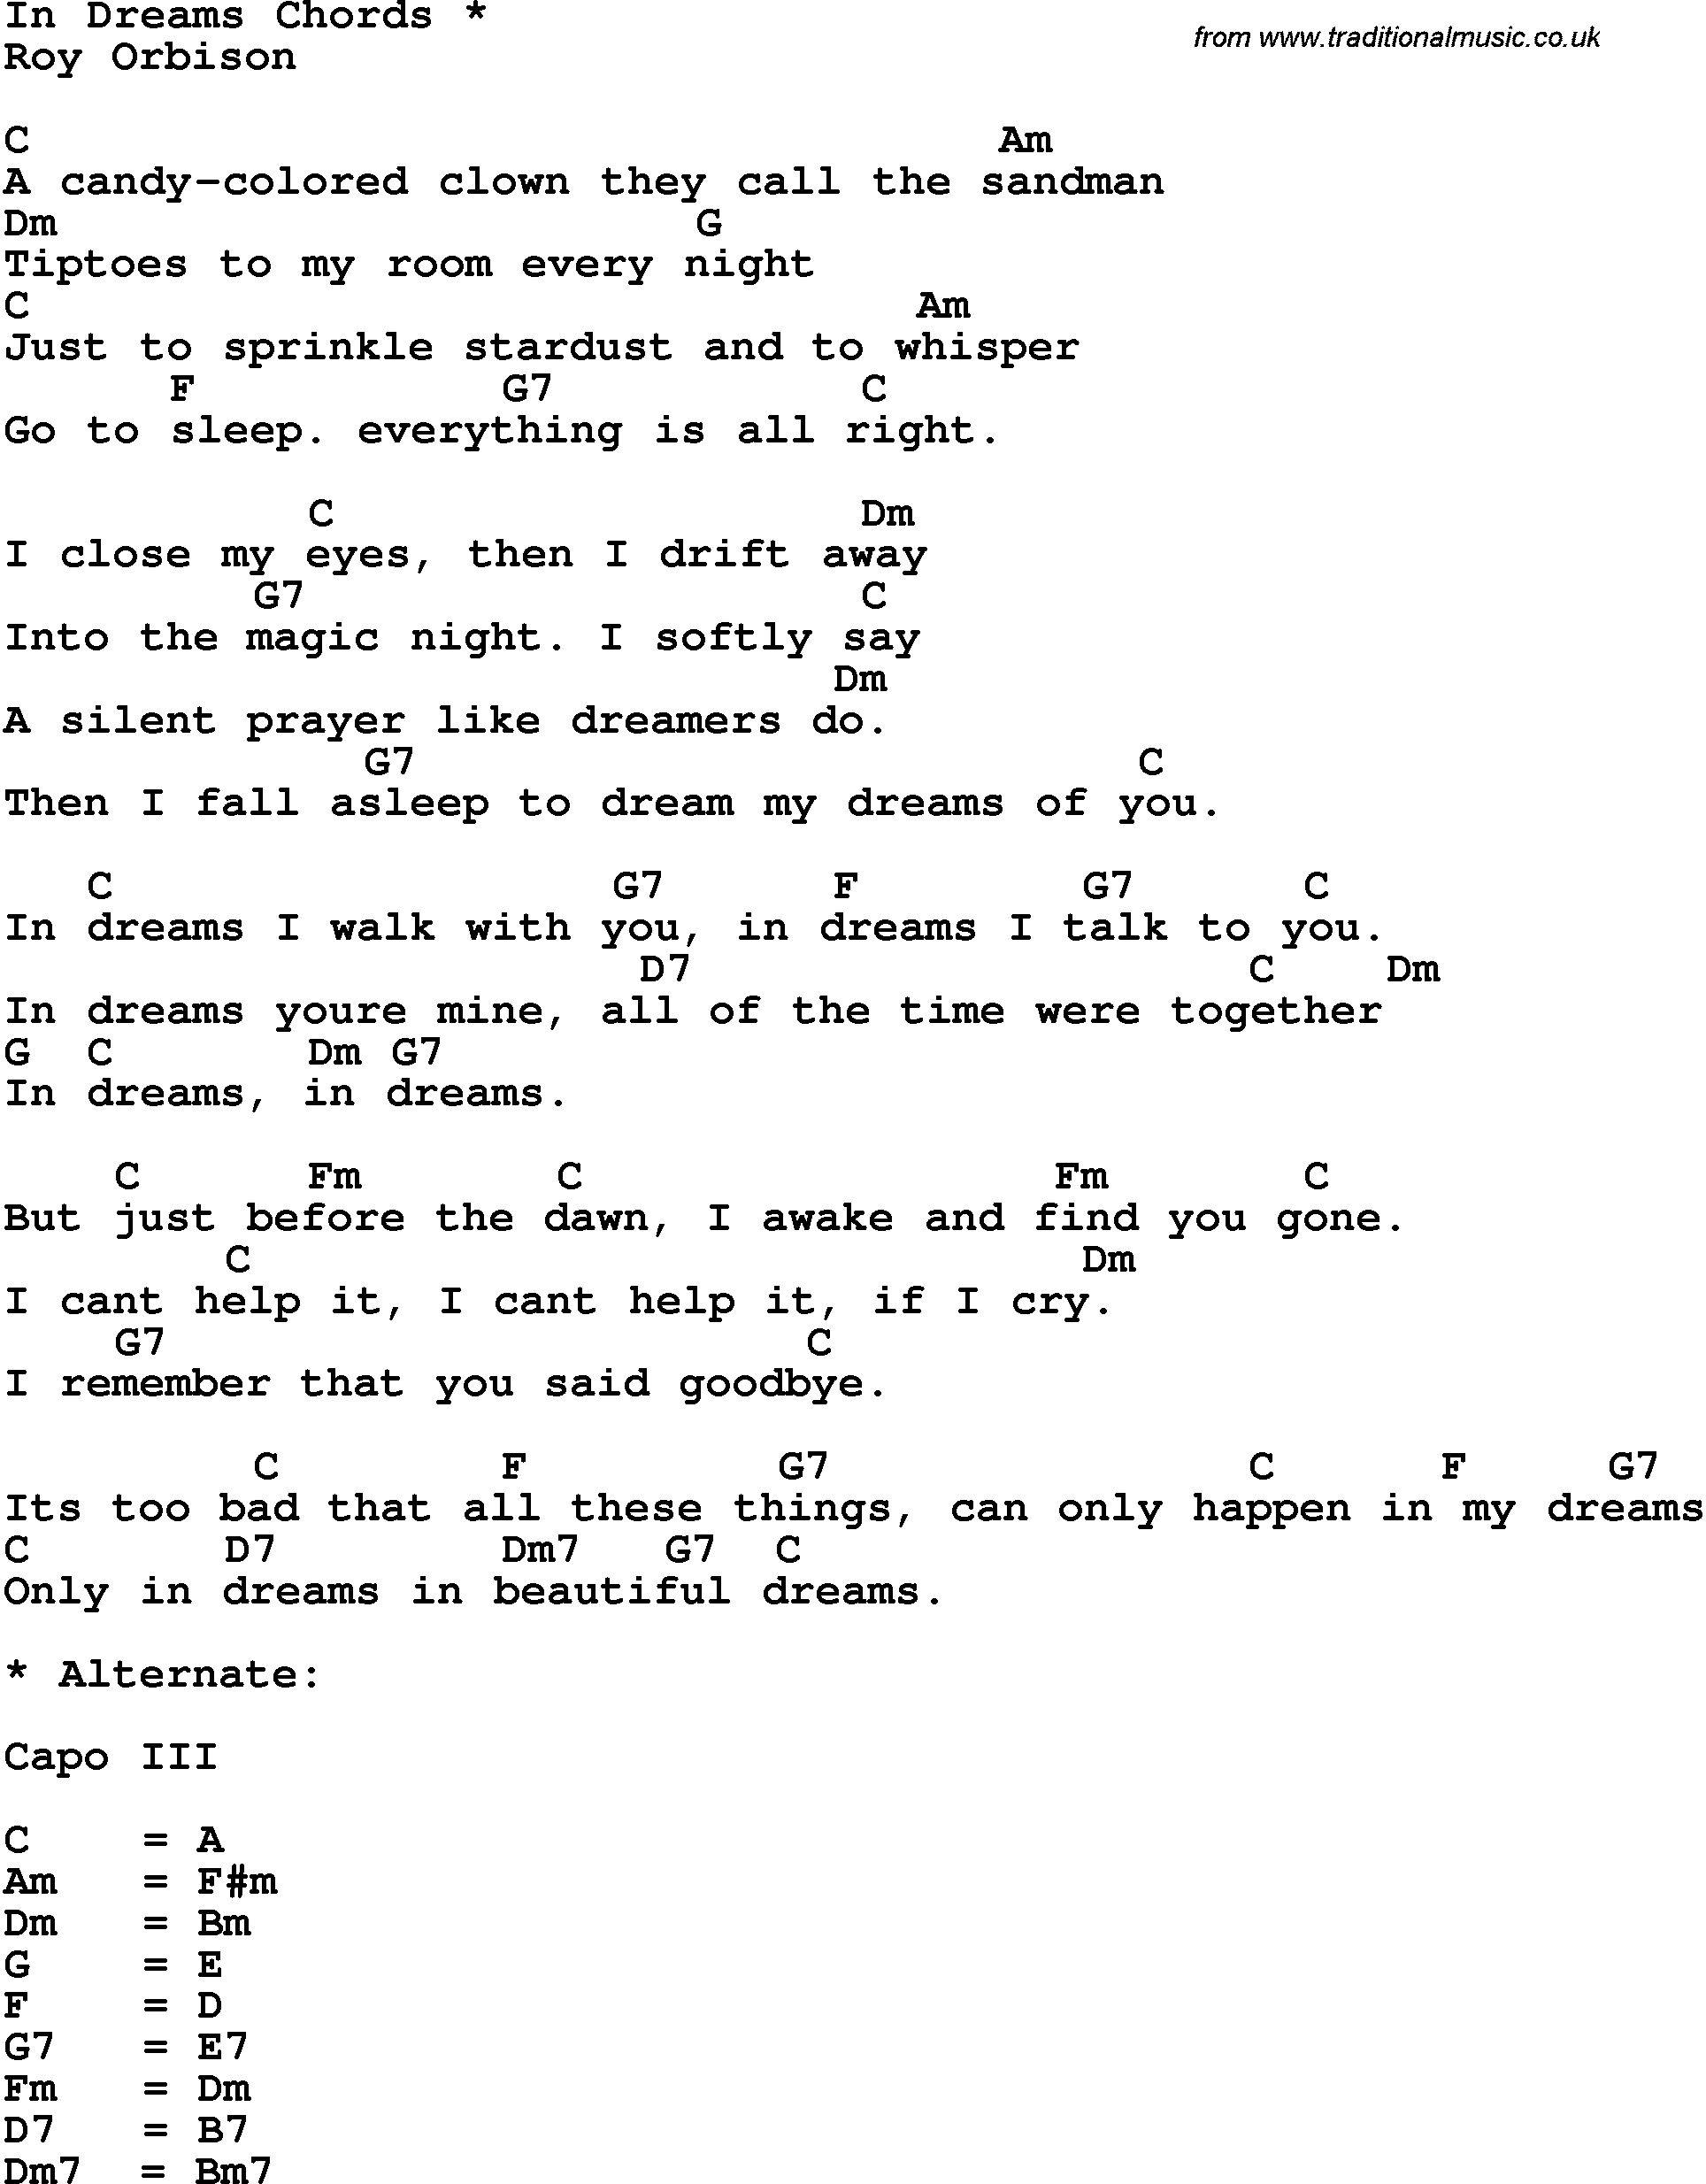 Song Lyrics with guitar chords for In Dreams